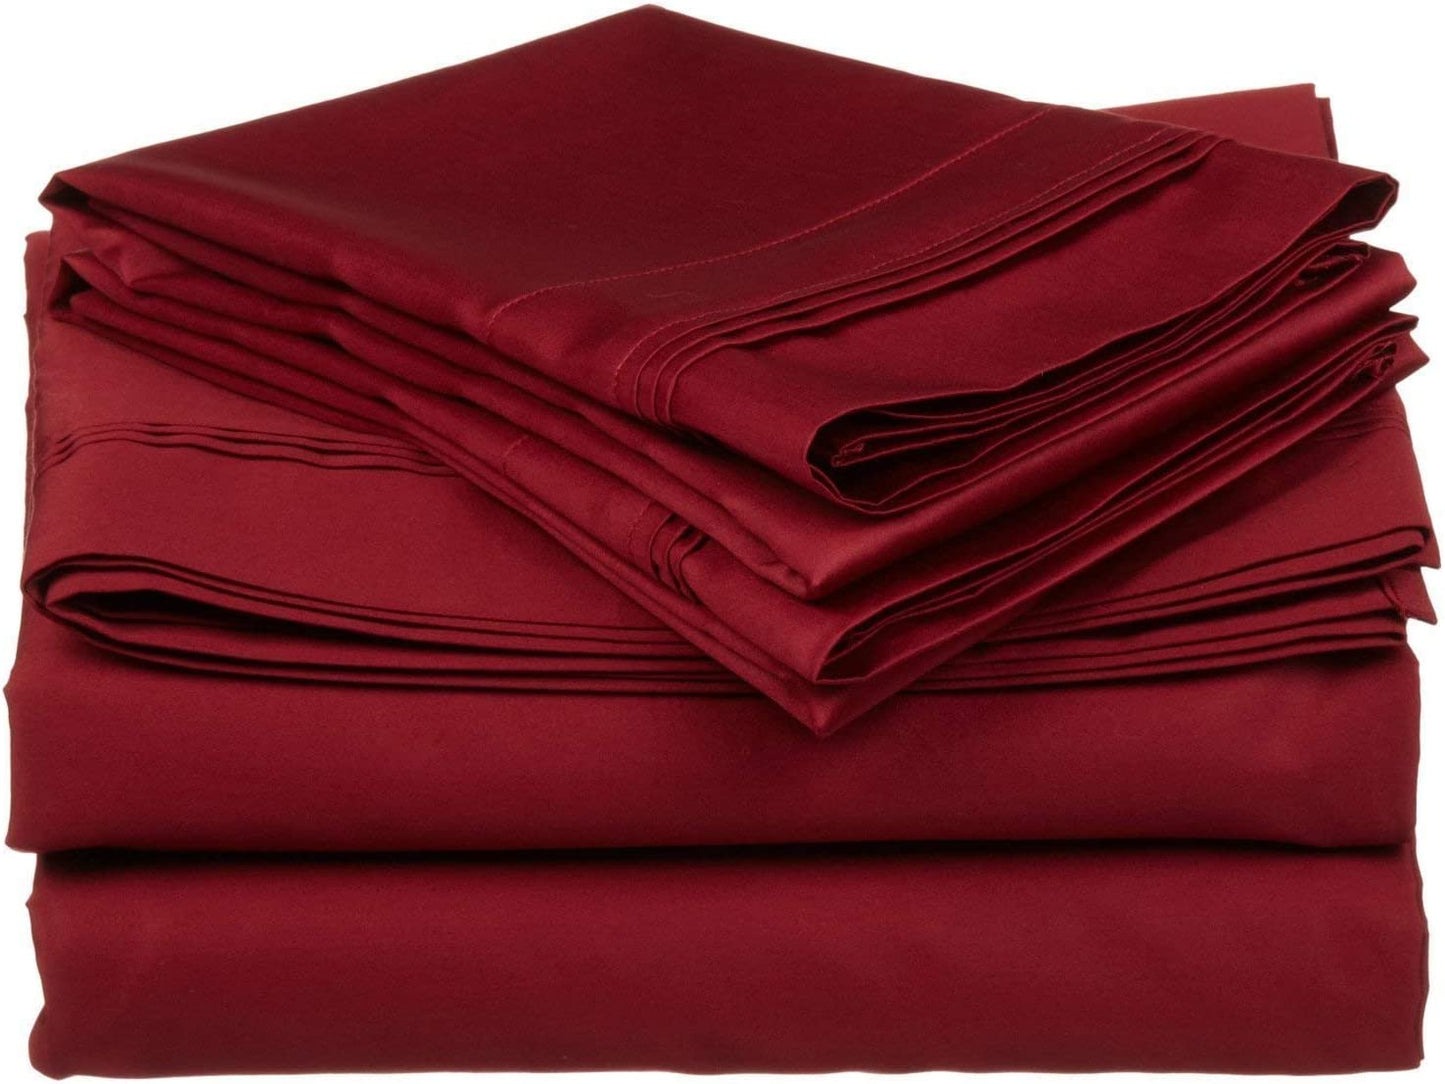 6 Inch Deep Pocket Burgundy Fitted Sheets 1000TC - All Sizes